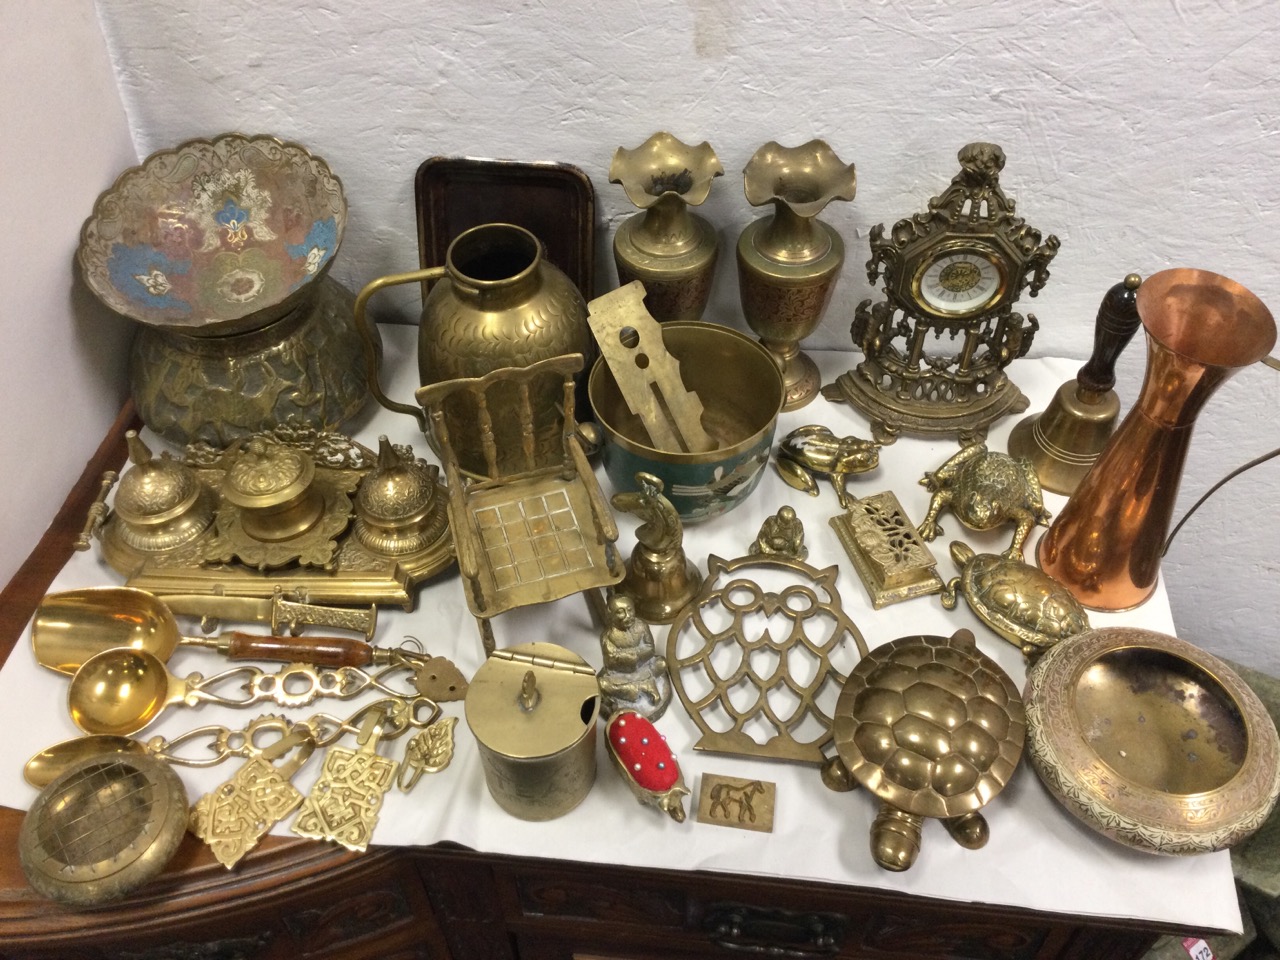 Miscellaneous brass including a desk stand, a pair of Indian vases, bowls, tortoises, ornaments, - Image 2 of 3